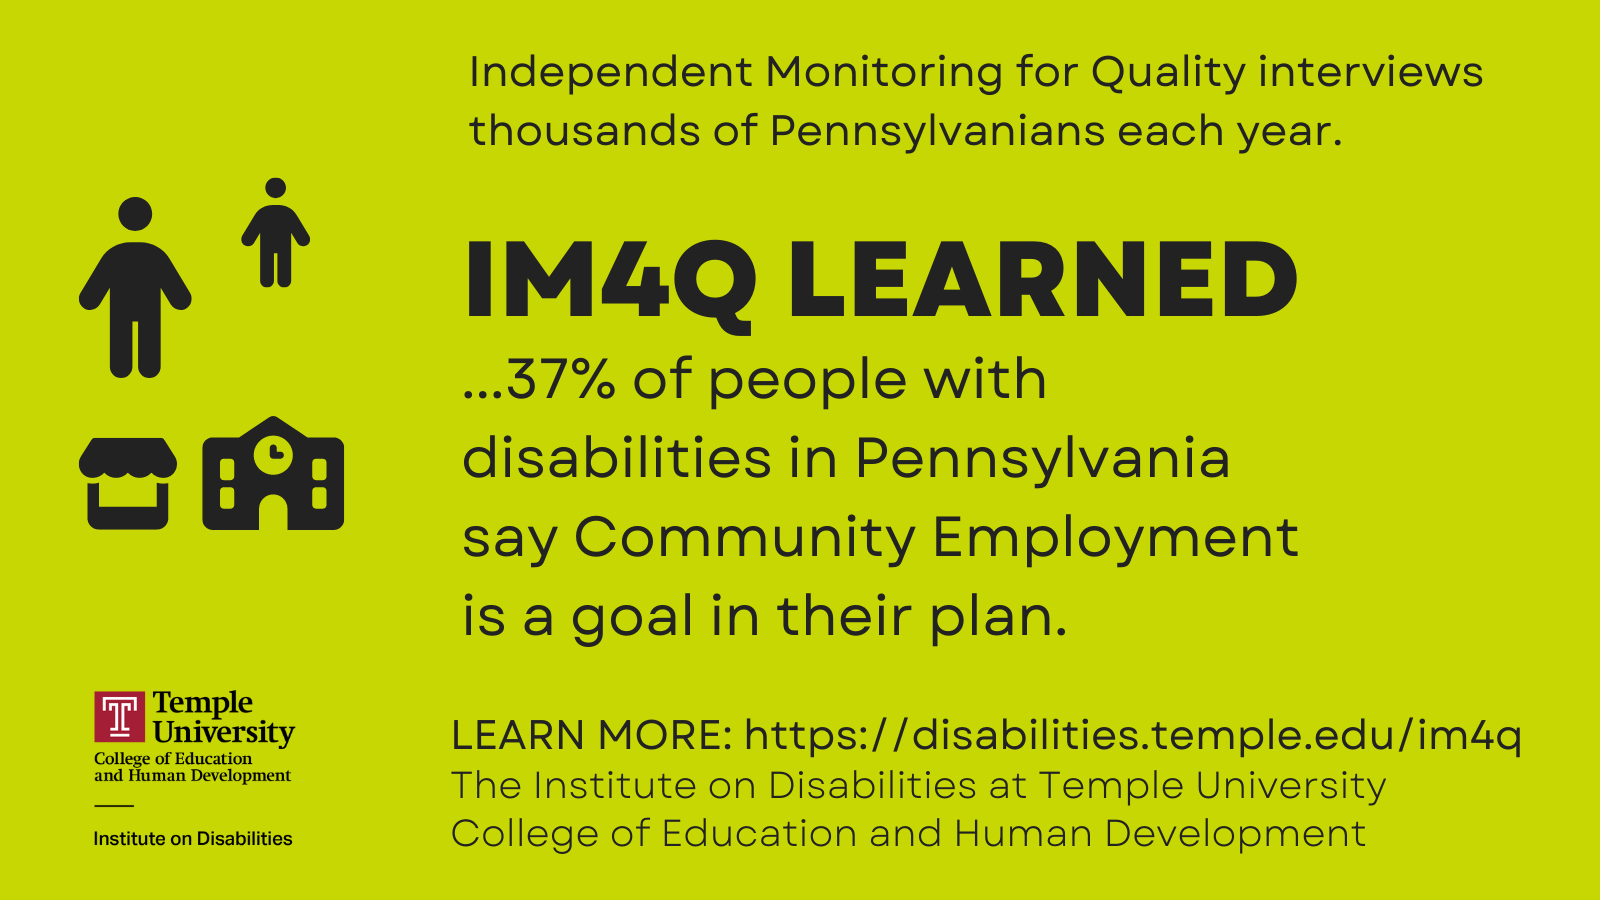 37% of people with disabilities in Pennsylvania say Community Employment is a goal in their plan.